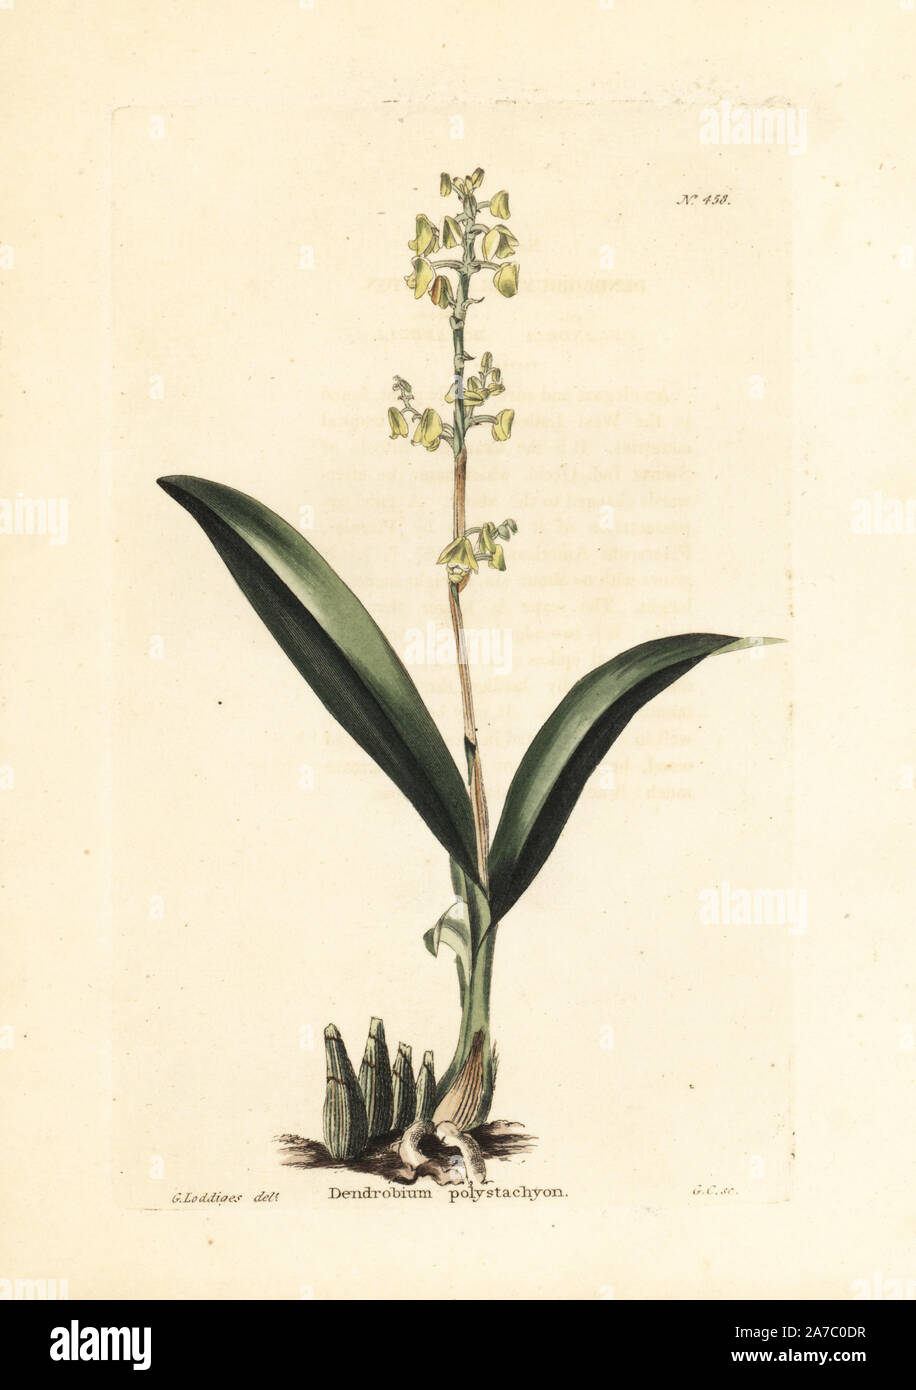 Polystachya concreta orchid. Handcoloured copperplate engraving by George Cooke after an illustration by George Loddiges from Conrad Loddiges' Botanical Cabinet, London, 1810. Stock Photo